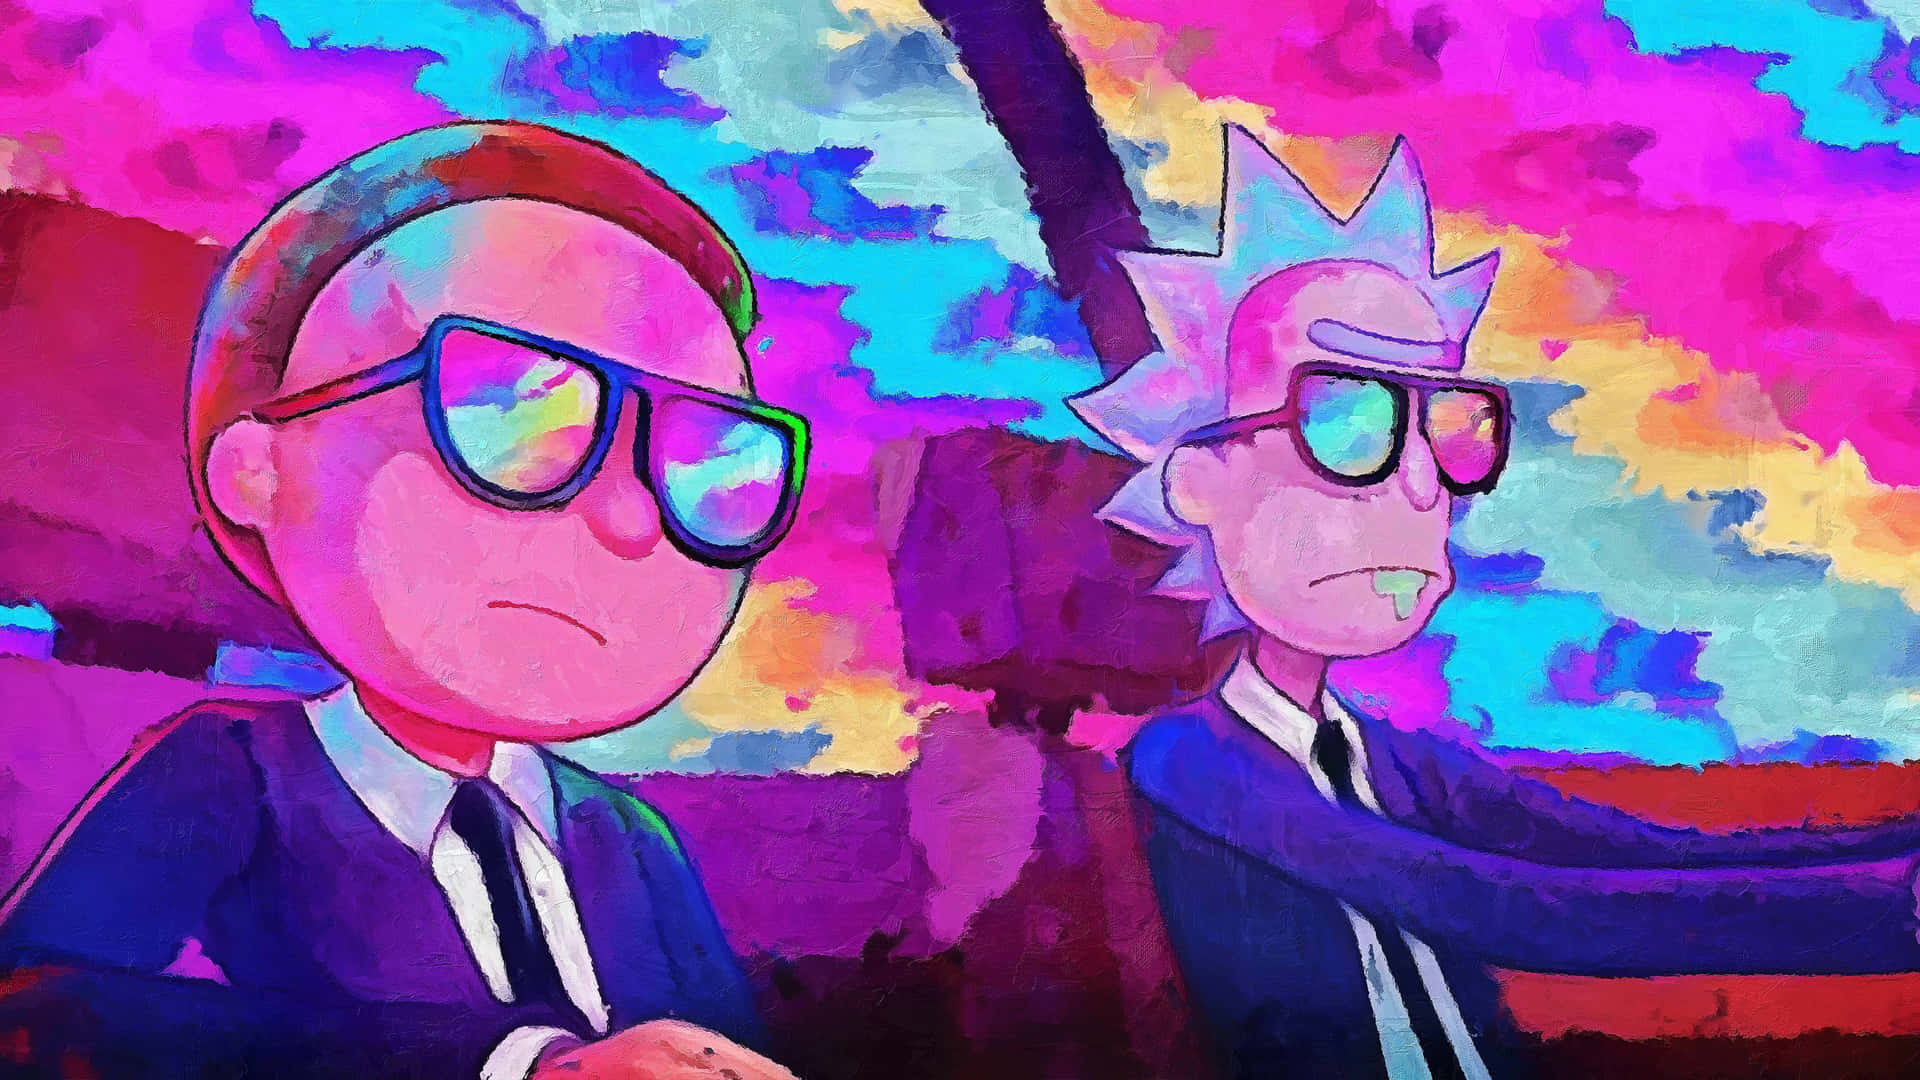 Take a Ride with Morty Smith Wallpaper